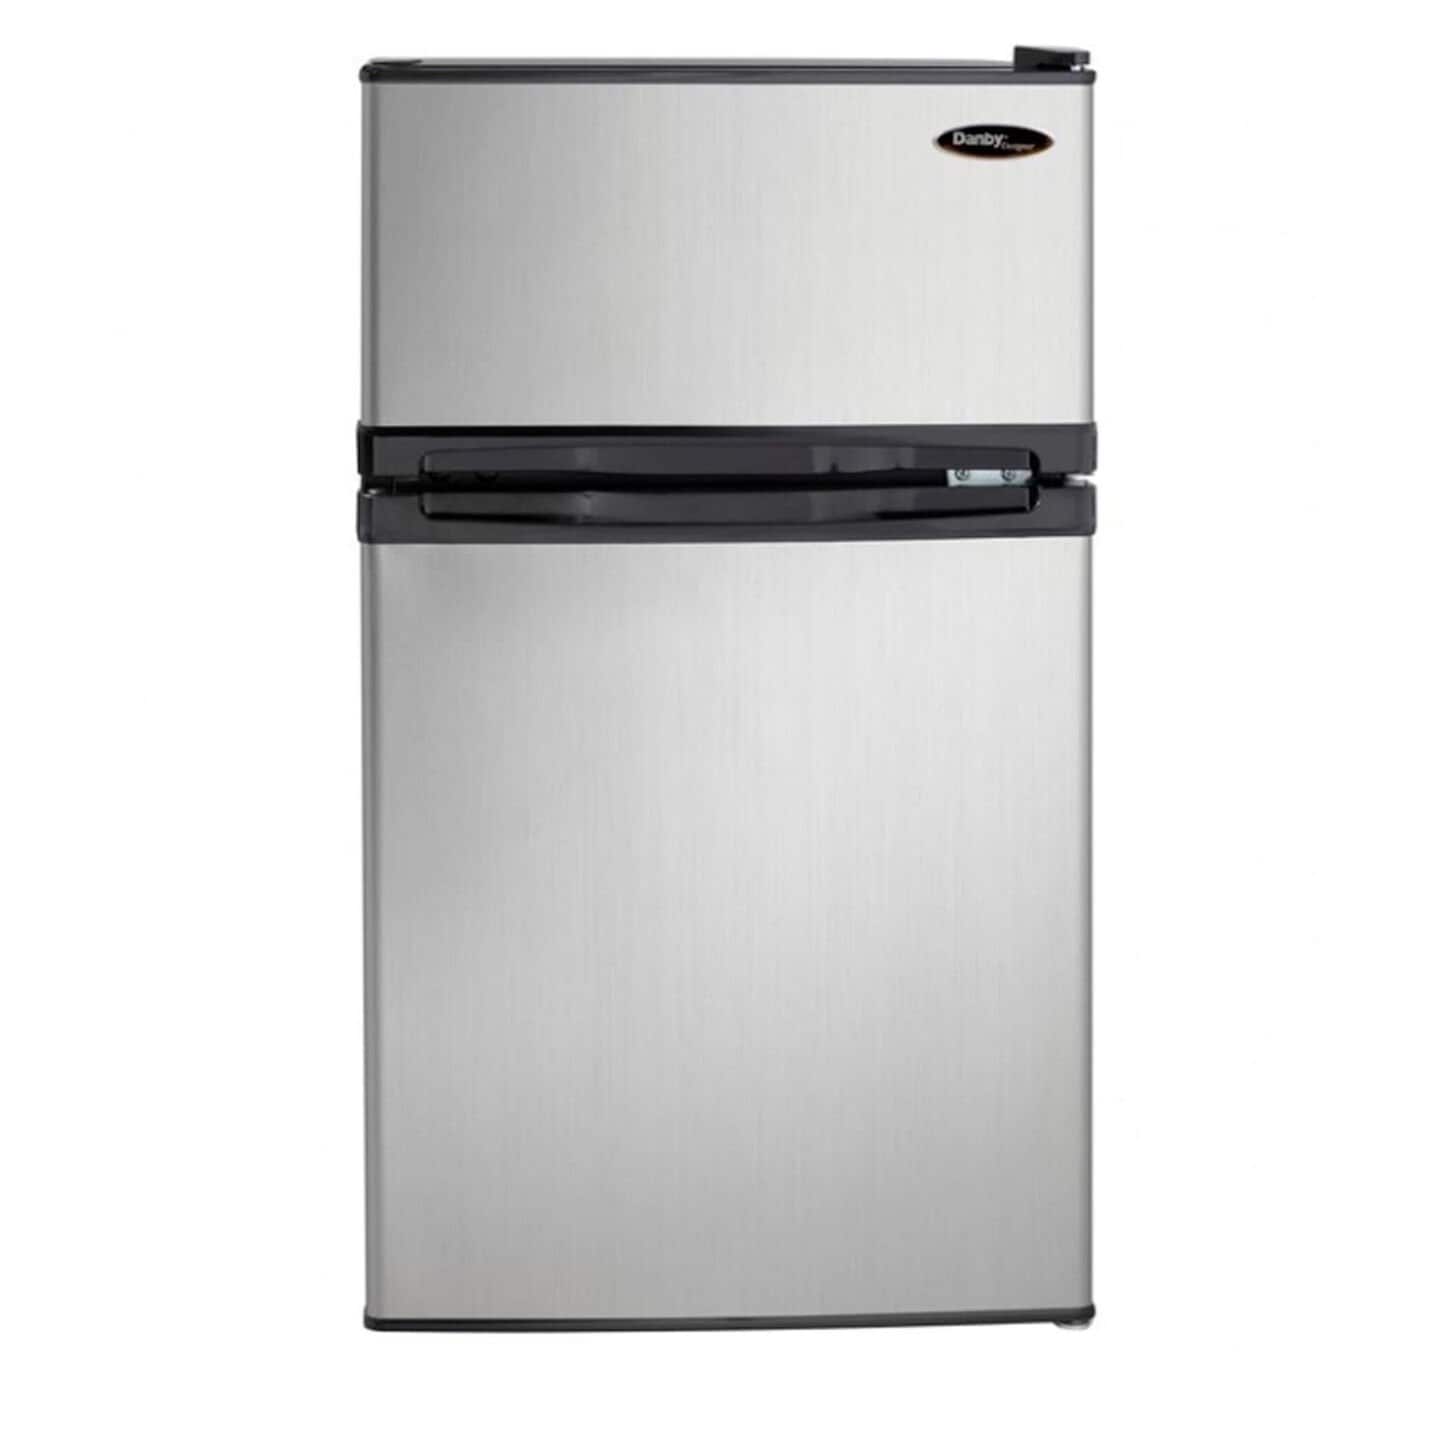 Danby Compact Refrigerator in Stainless Steel